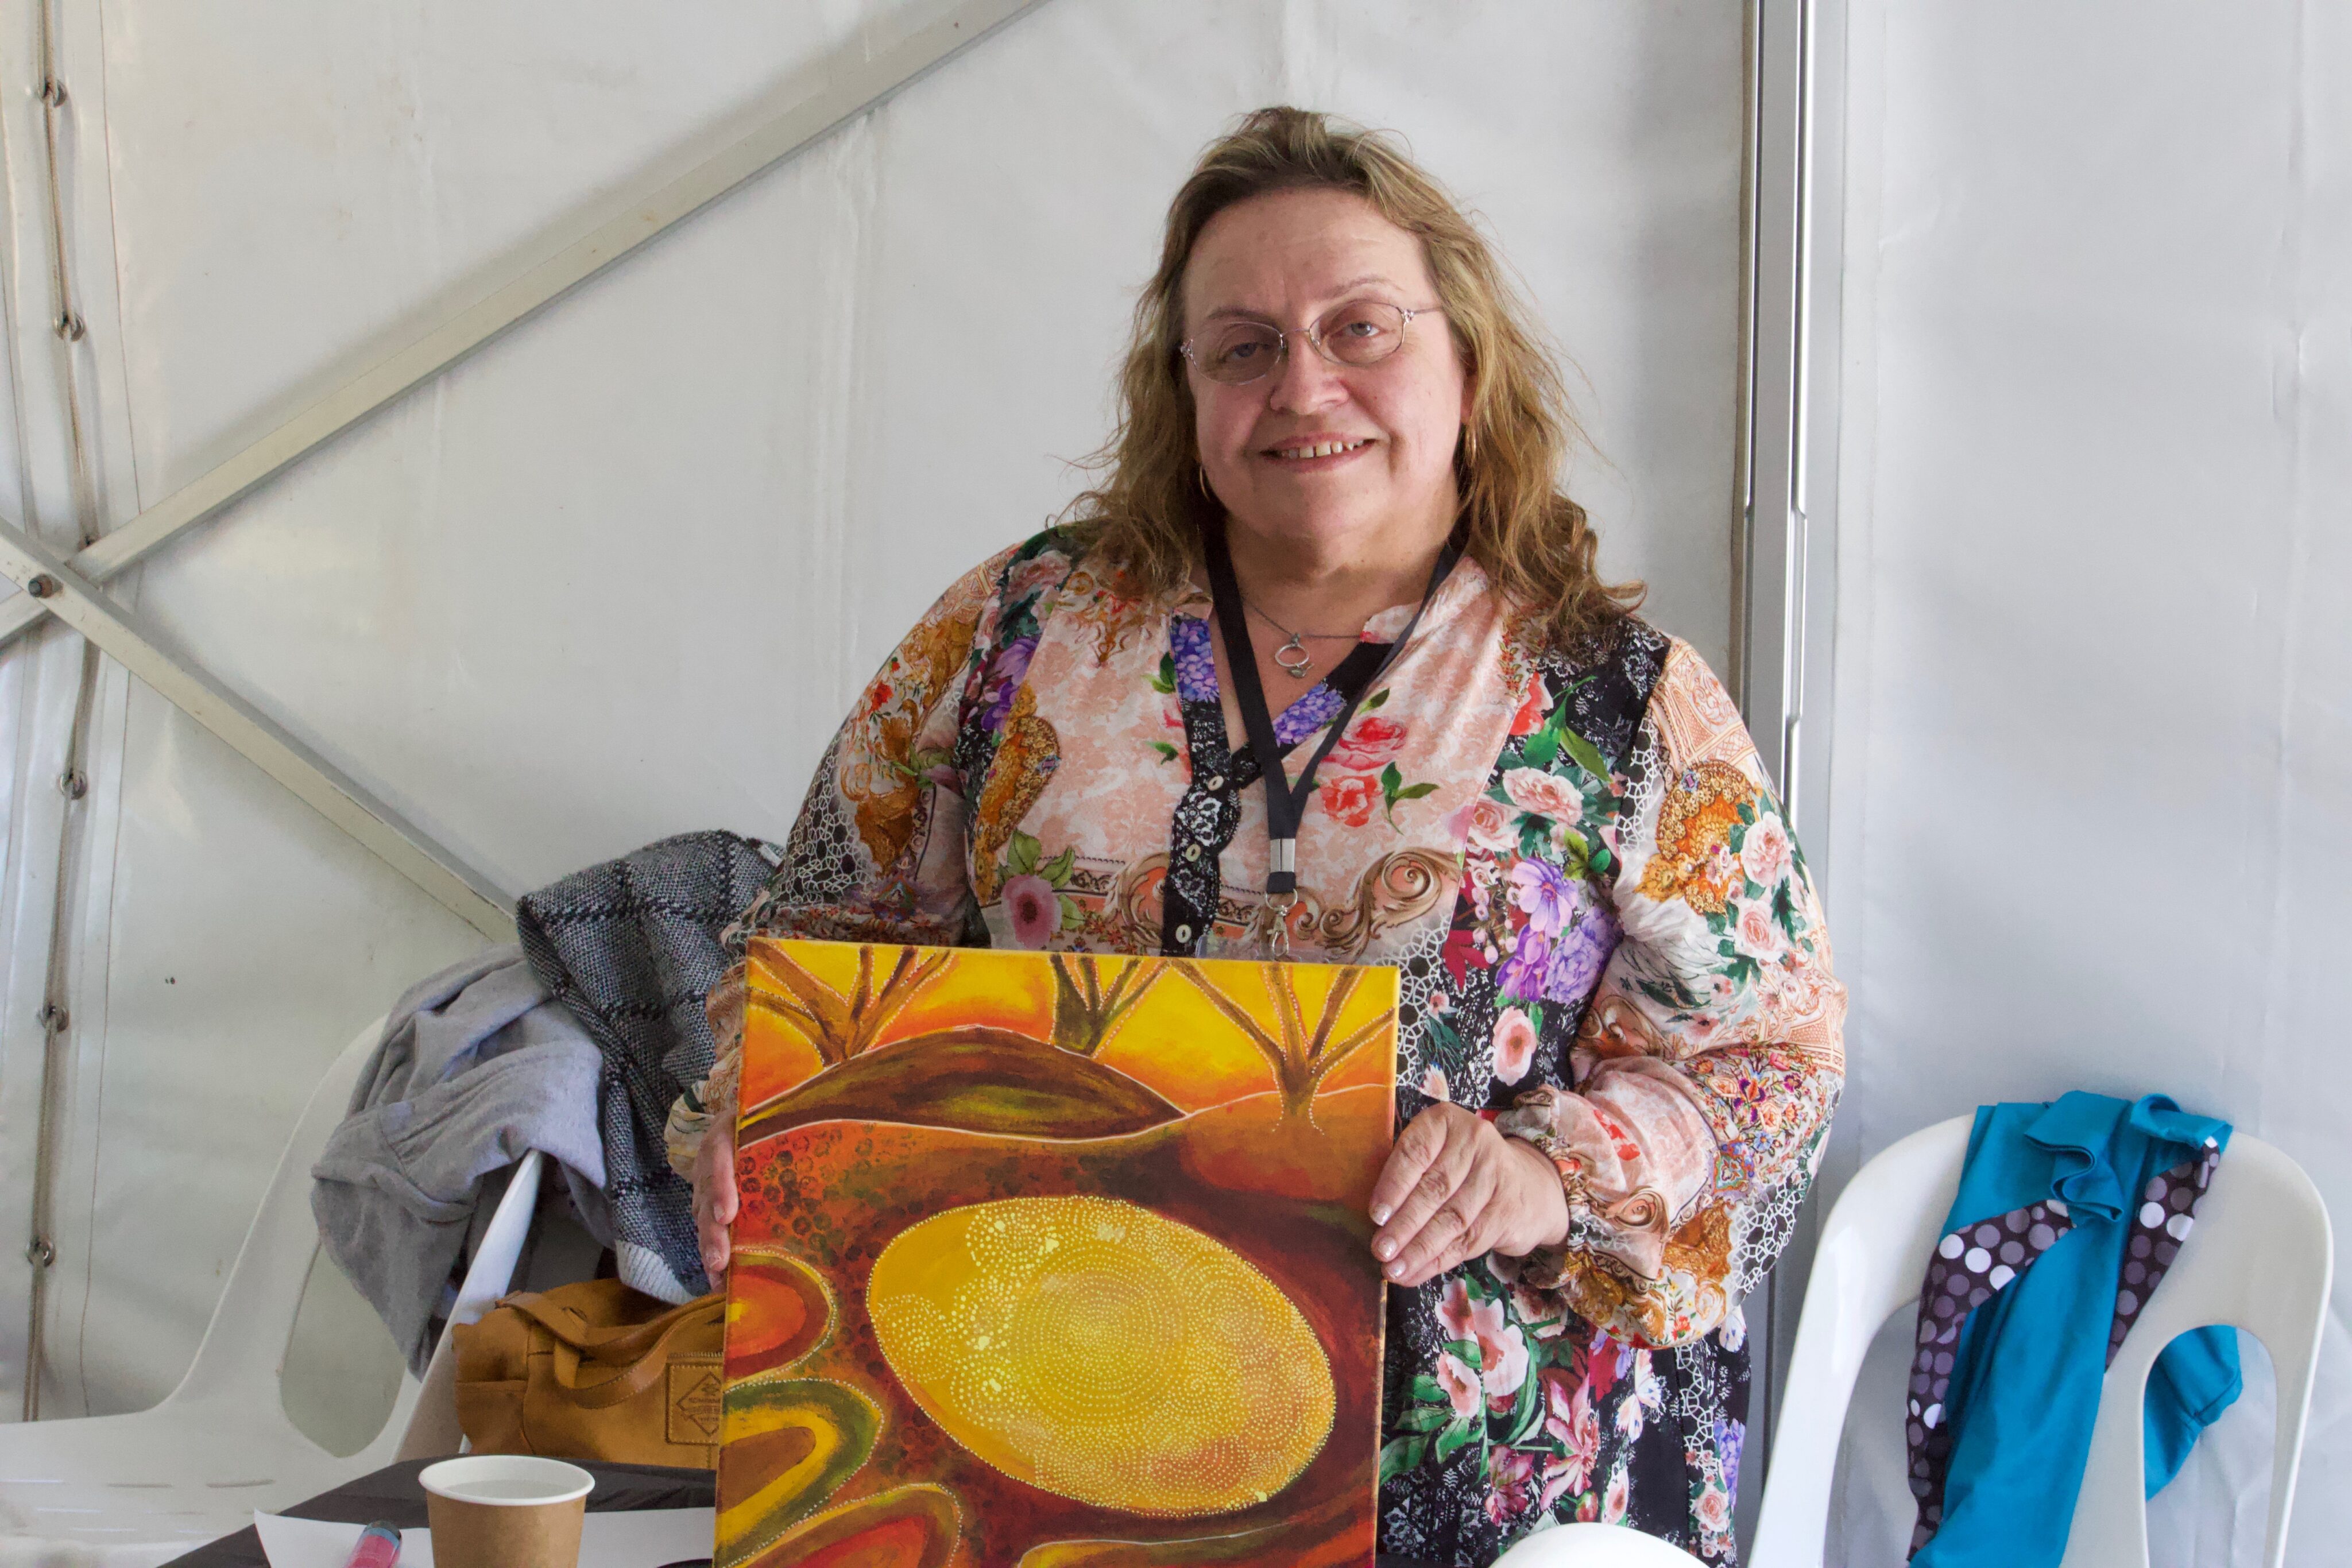 An artist and PWdWA member holding up her painting and smiling at the camera.